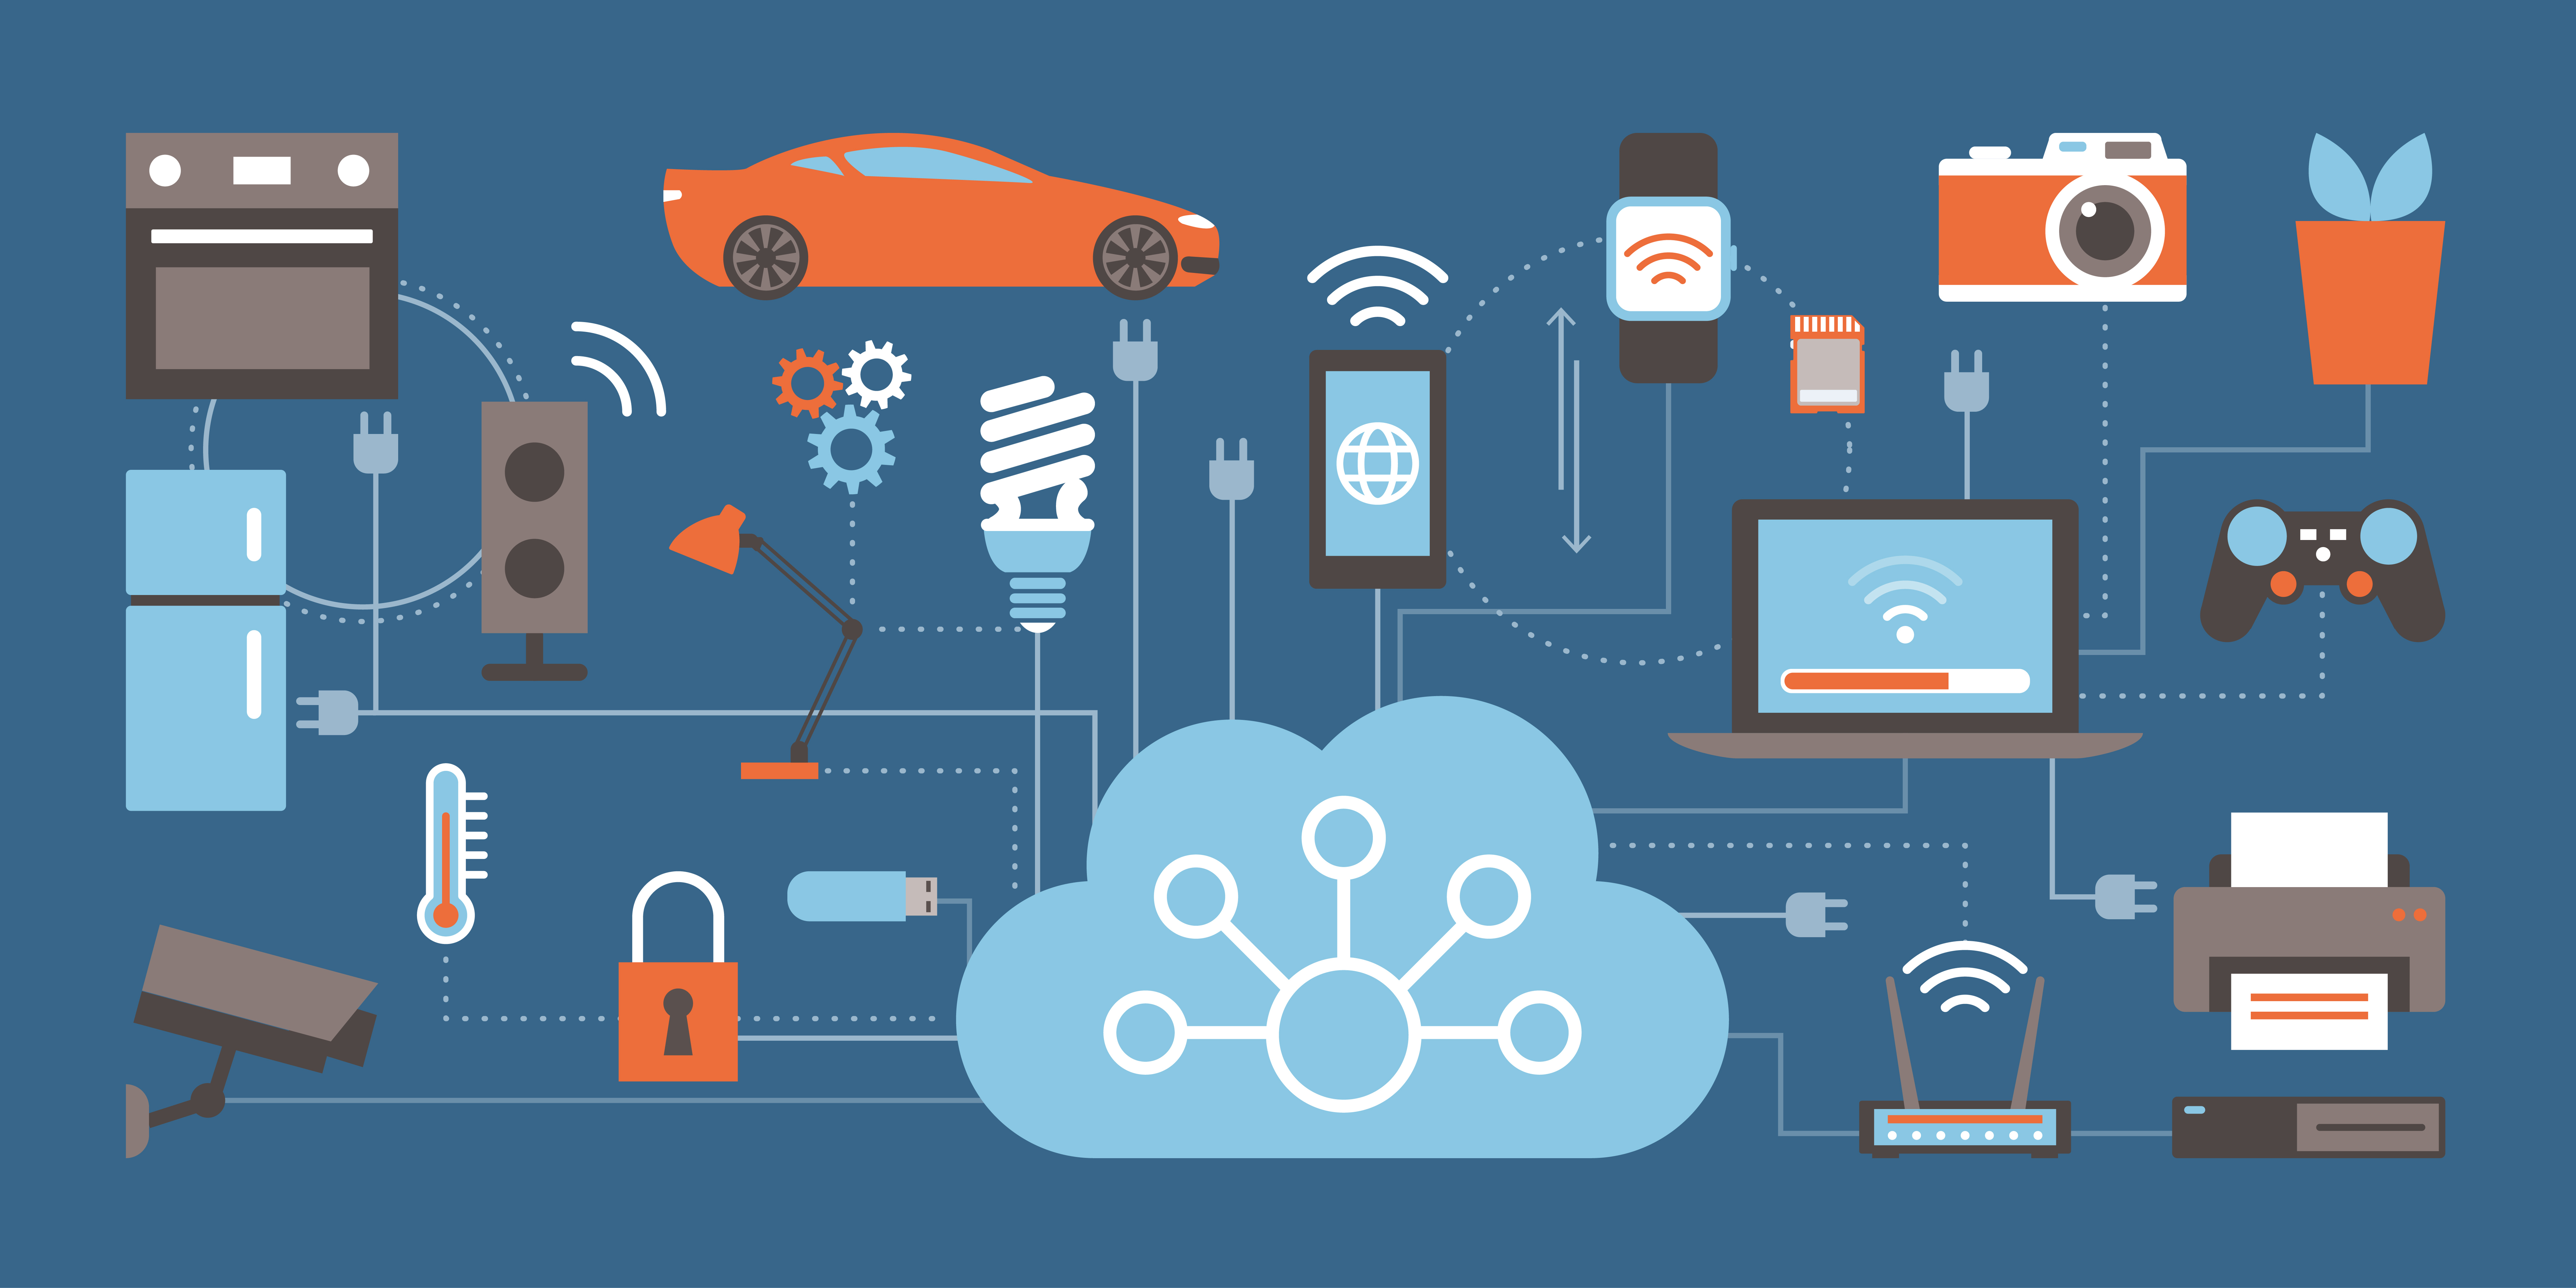 What Are The Biggest Security Threats For Internet Of Things (Iot) Devices?